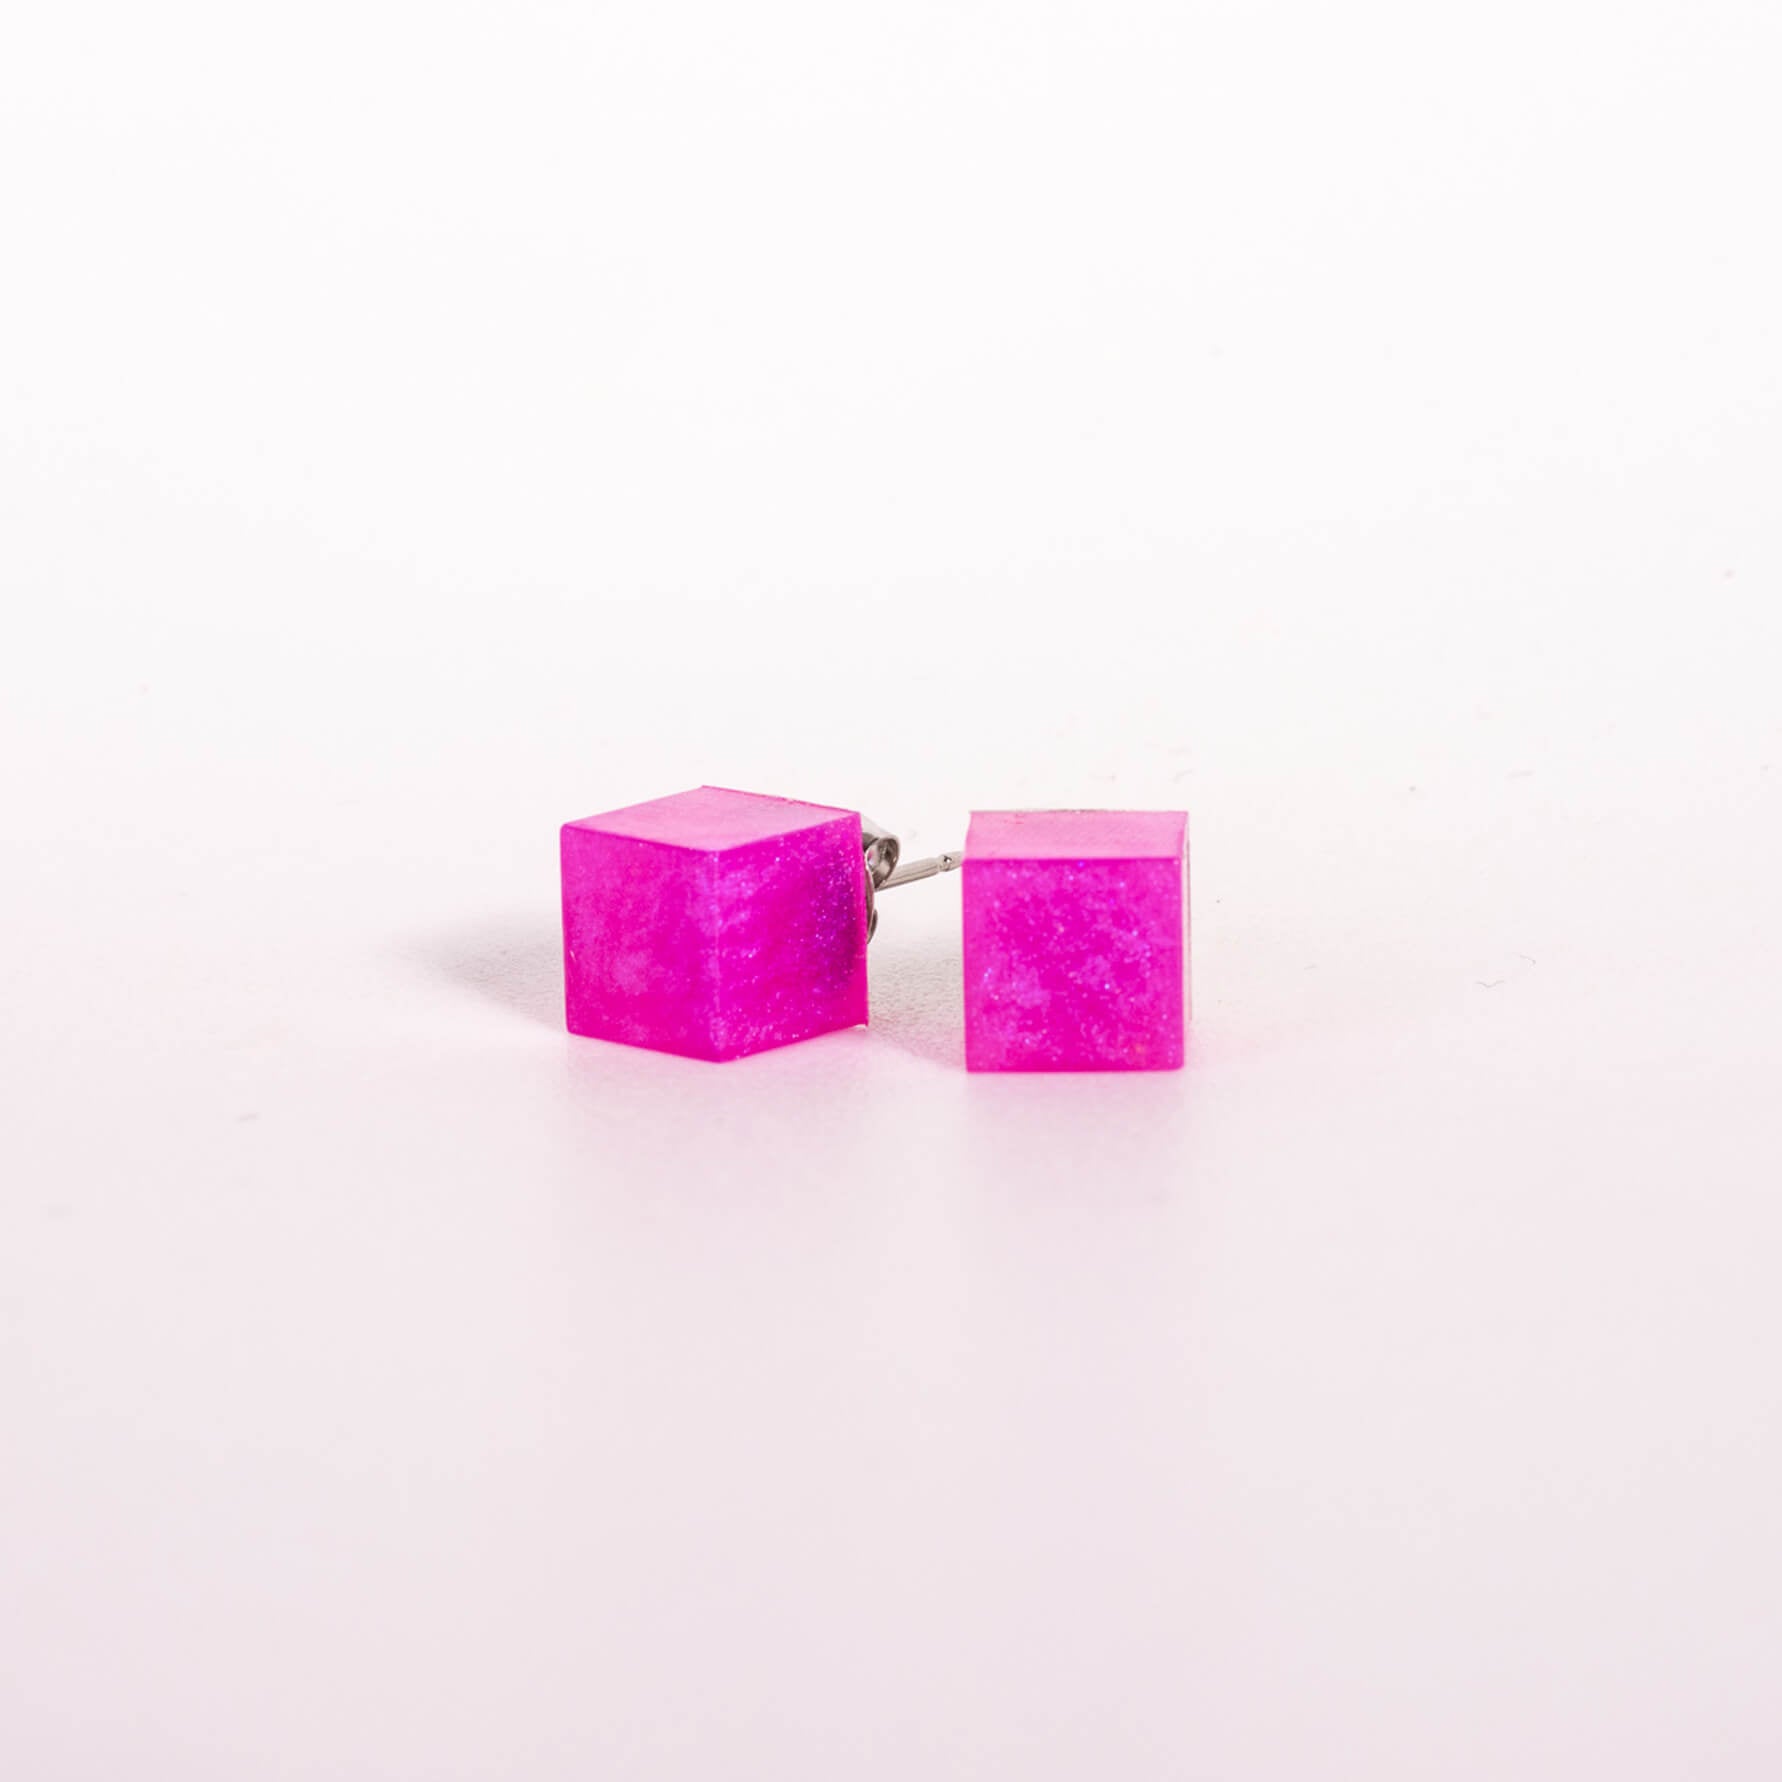 Hot pink resin cube stud earrings from desiree clothing